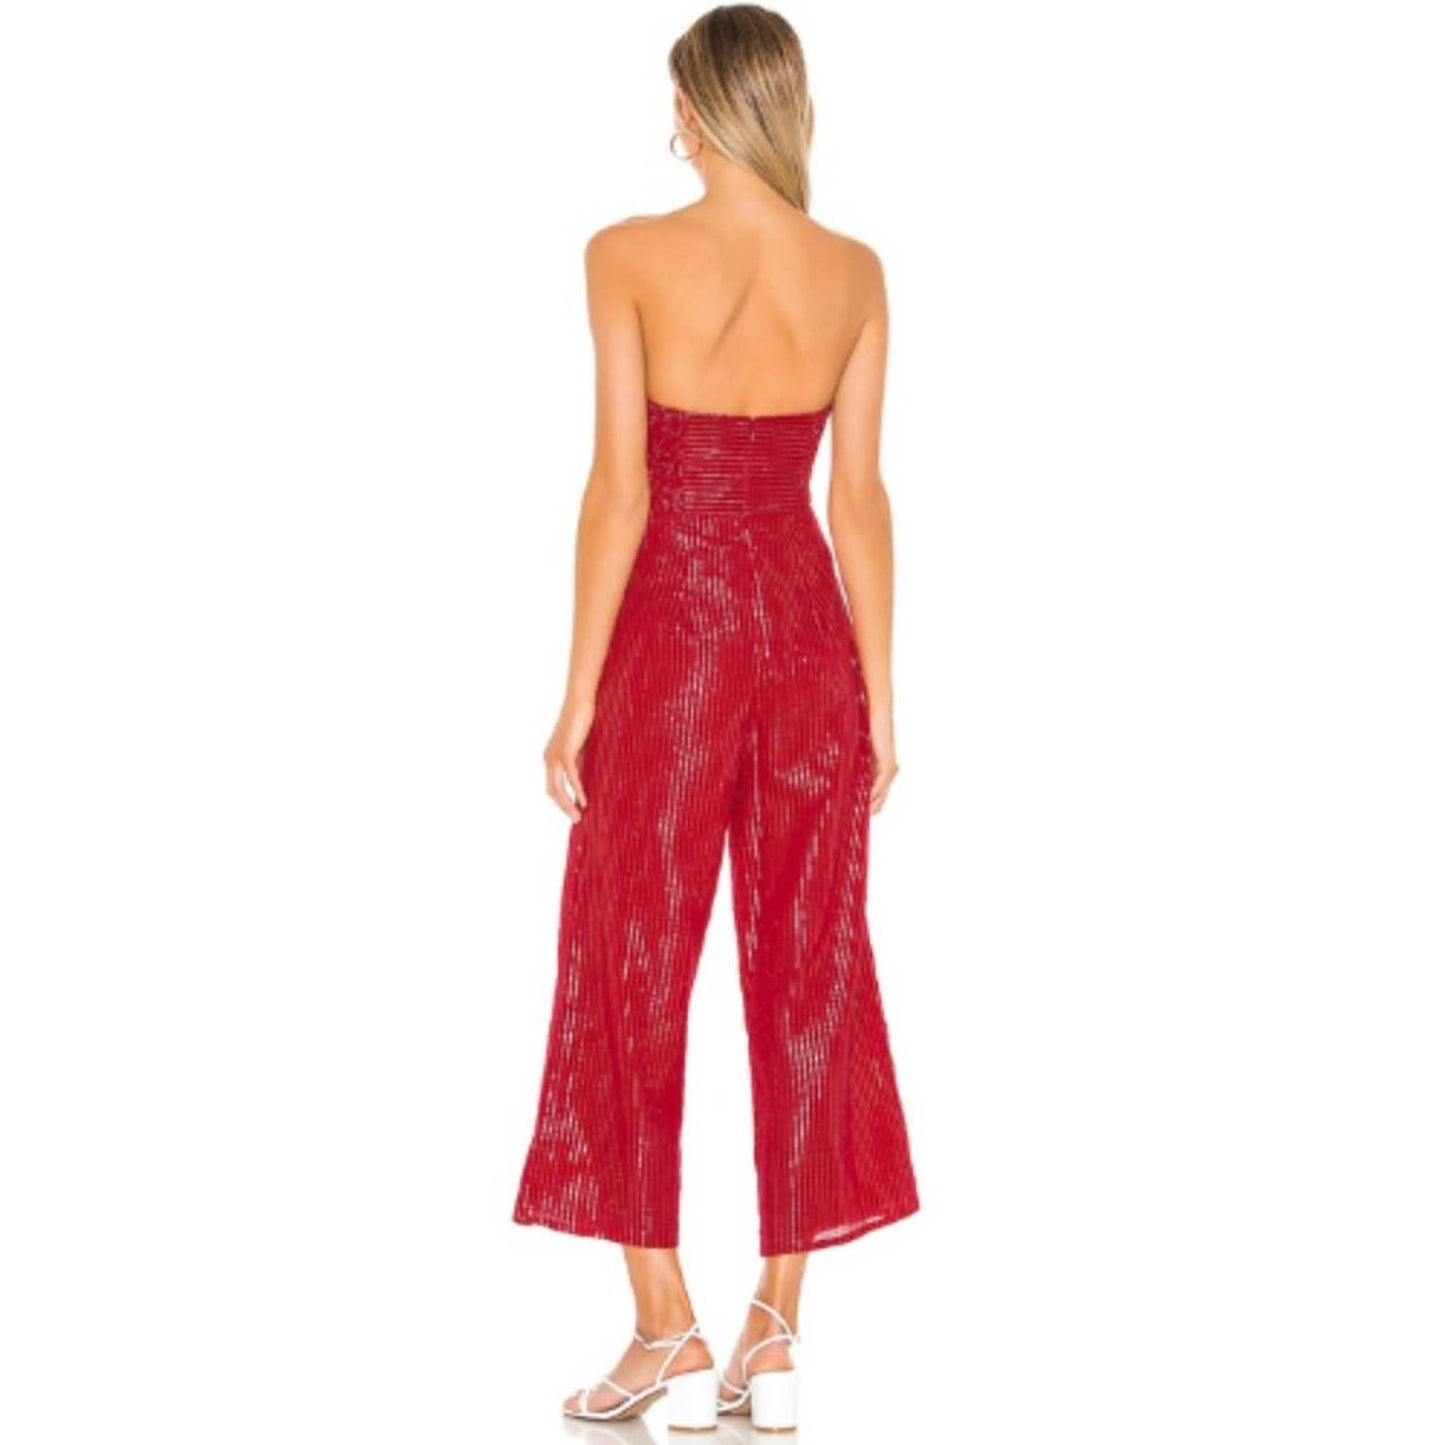 MAJORELLE Tessa Jumpsuit in Red NWOT Size Small